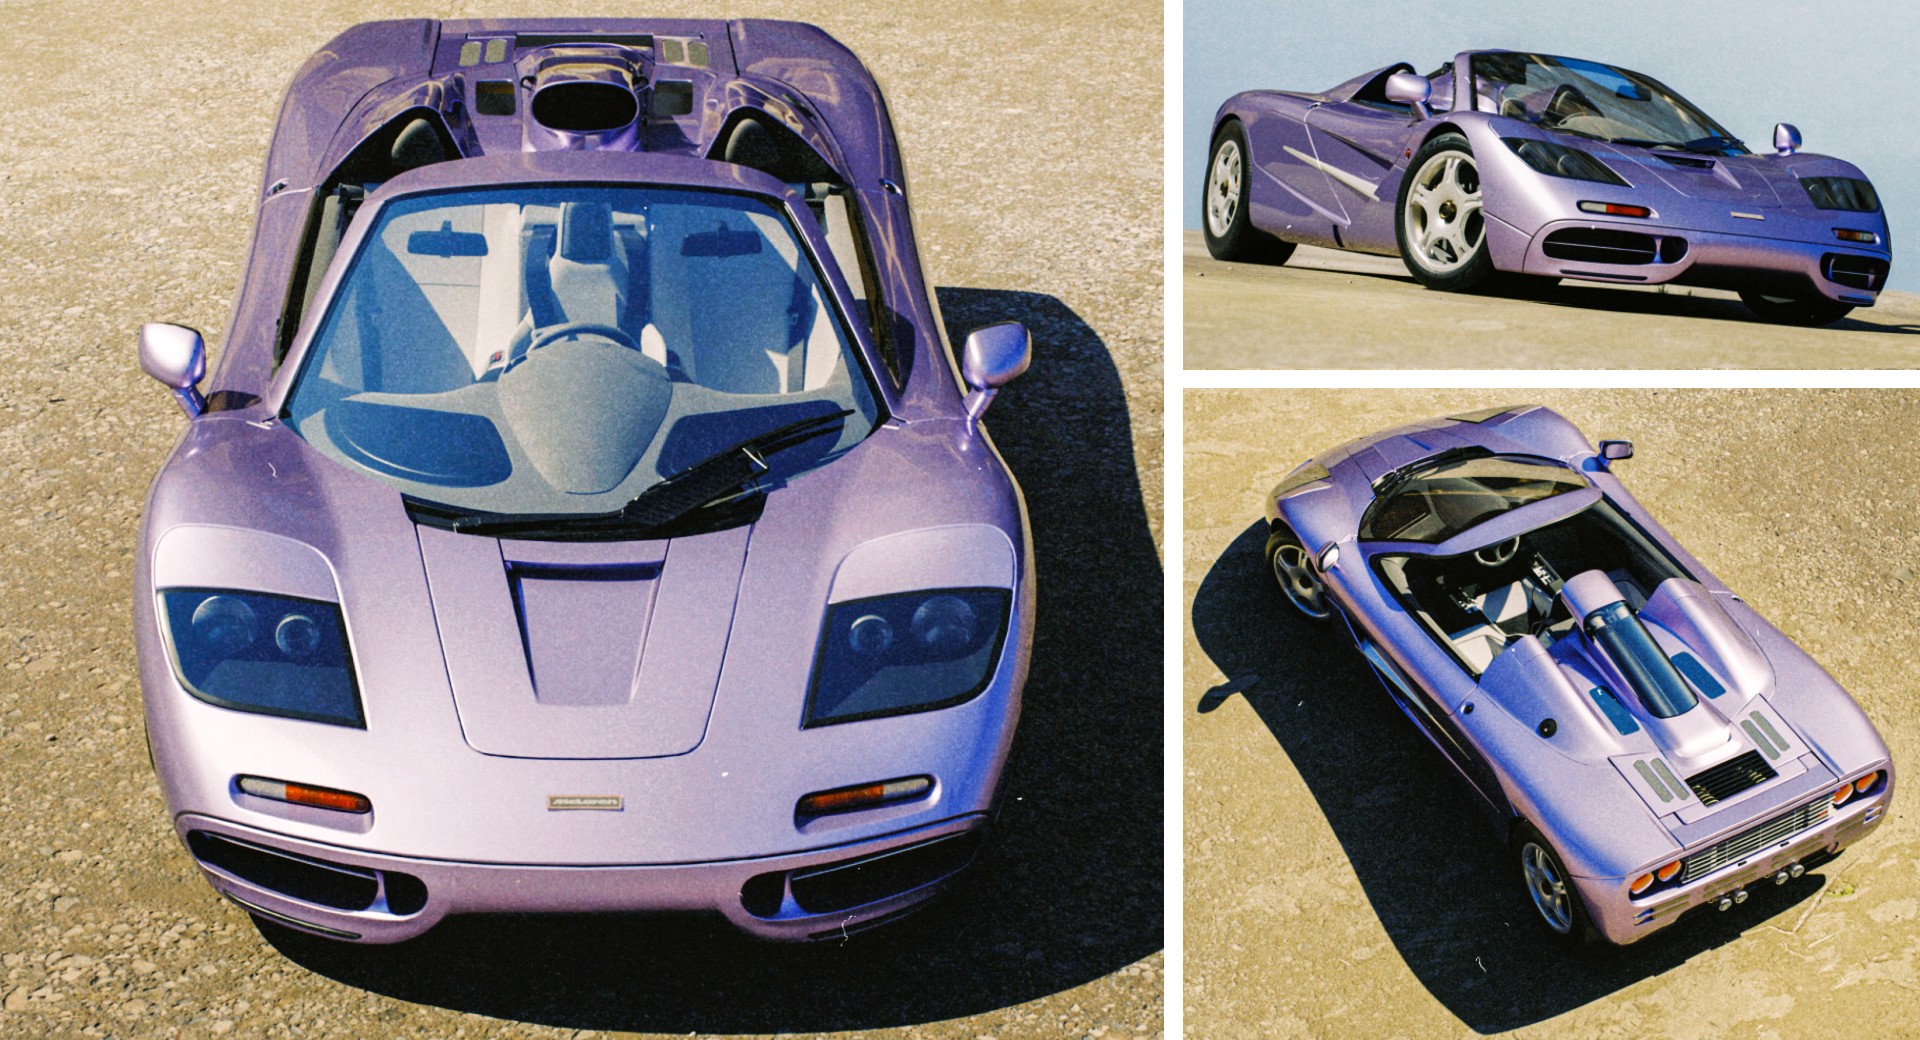 Why You'll Hardly Find Any McLaren F1s On The Road